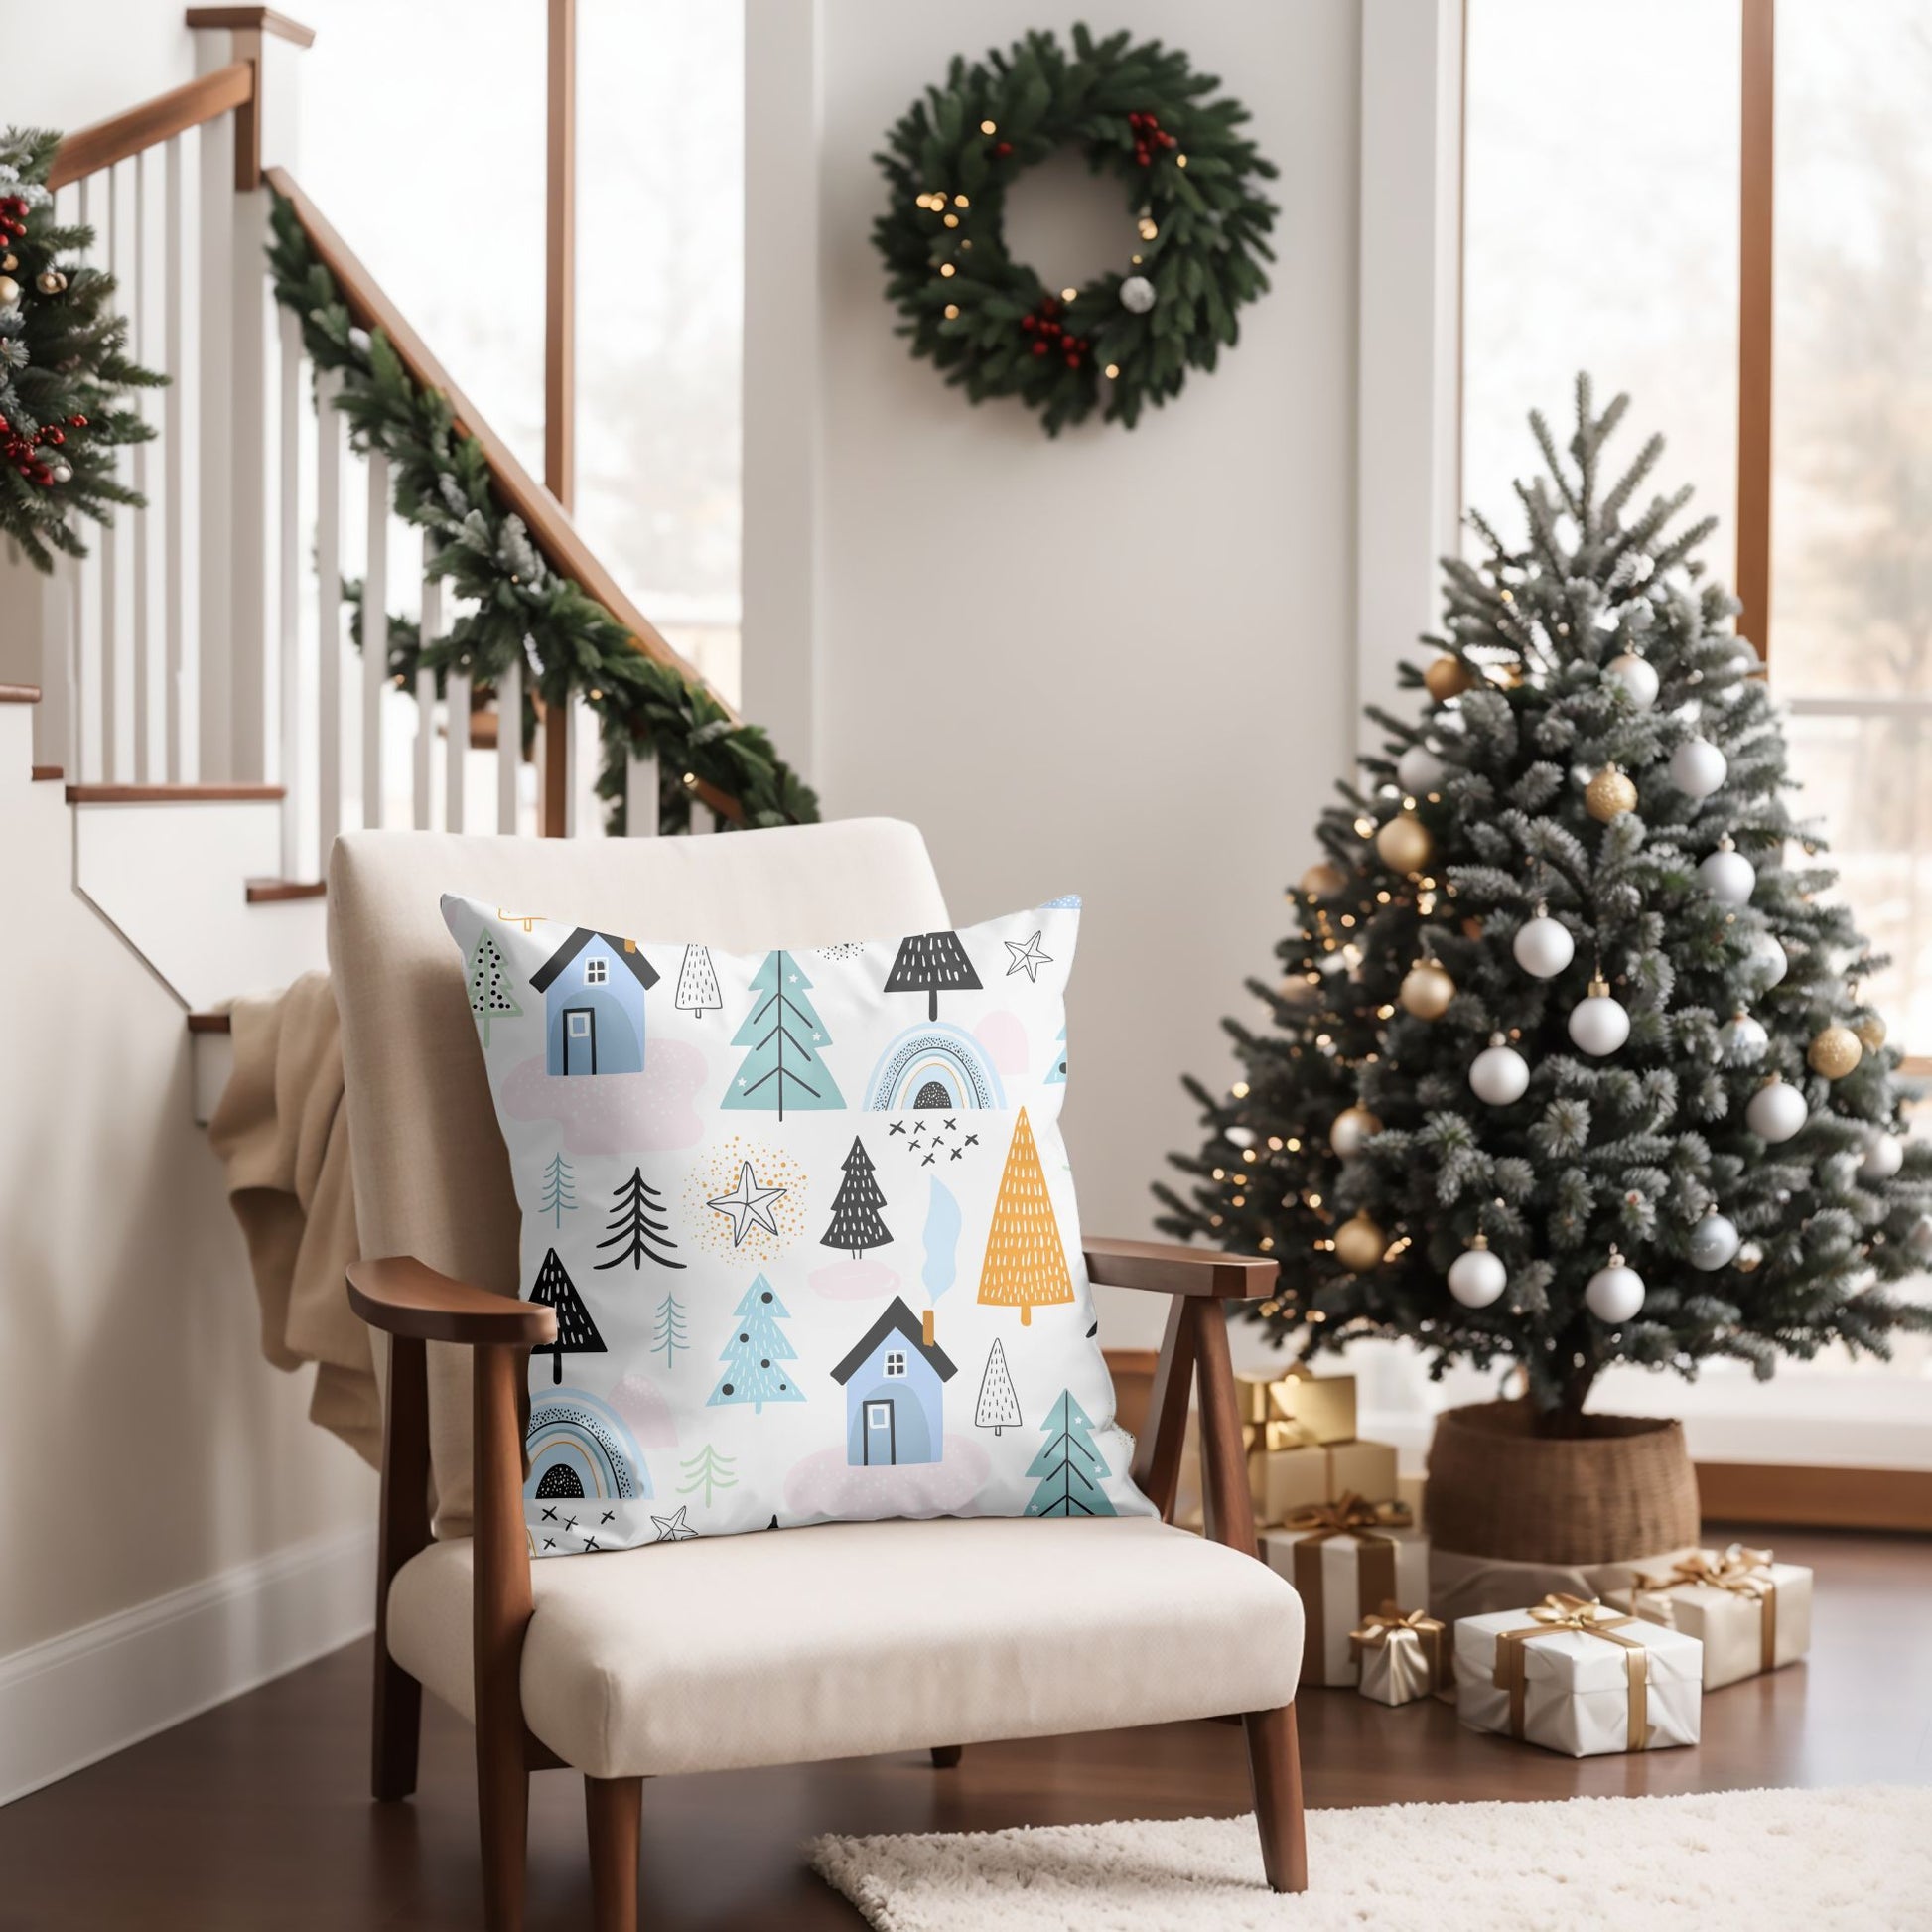 Cabin in Snowy Forest Christmas Pillow for Rustic Decor